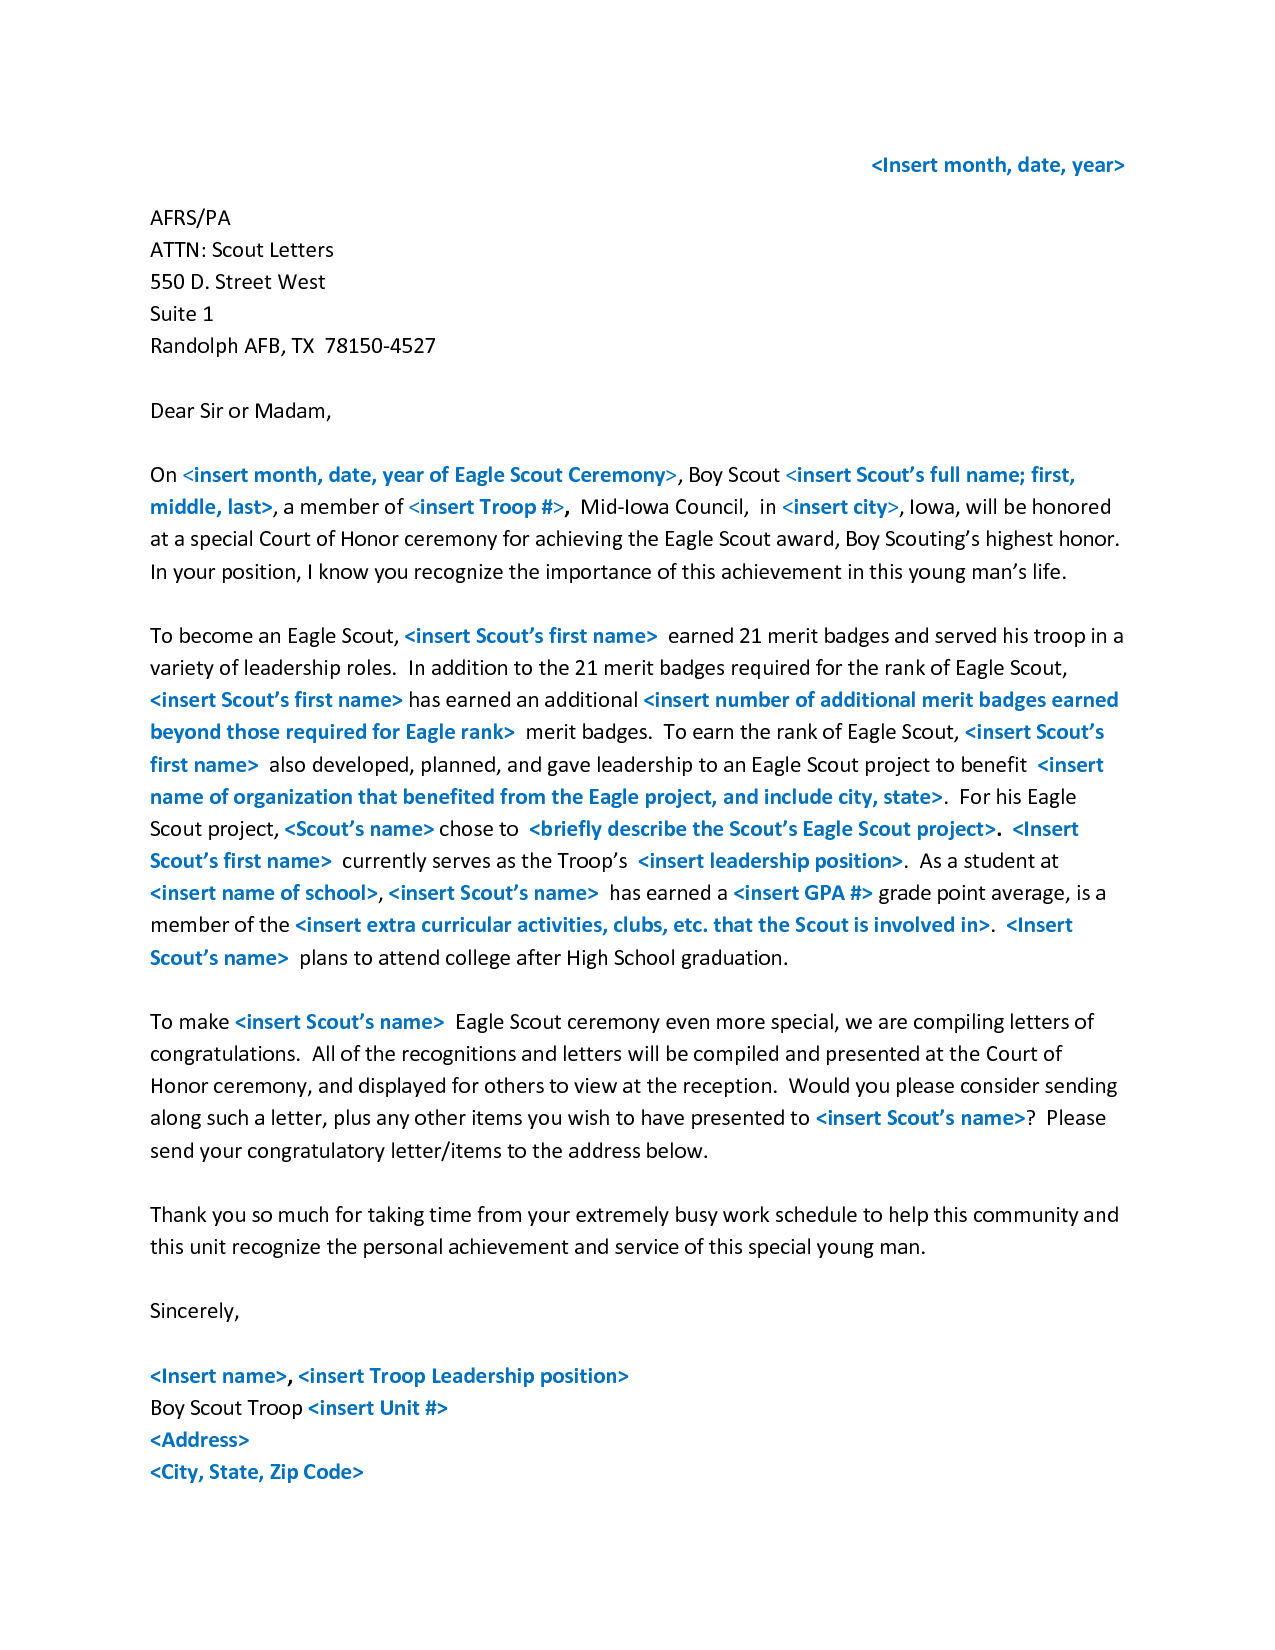 Generic Letter Of Recommendation Template - Sample Eagle Re Mendation Letter Acurnamedia